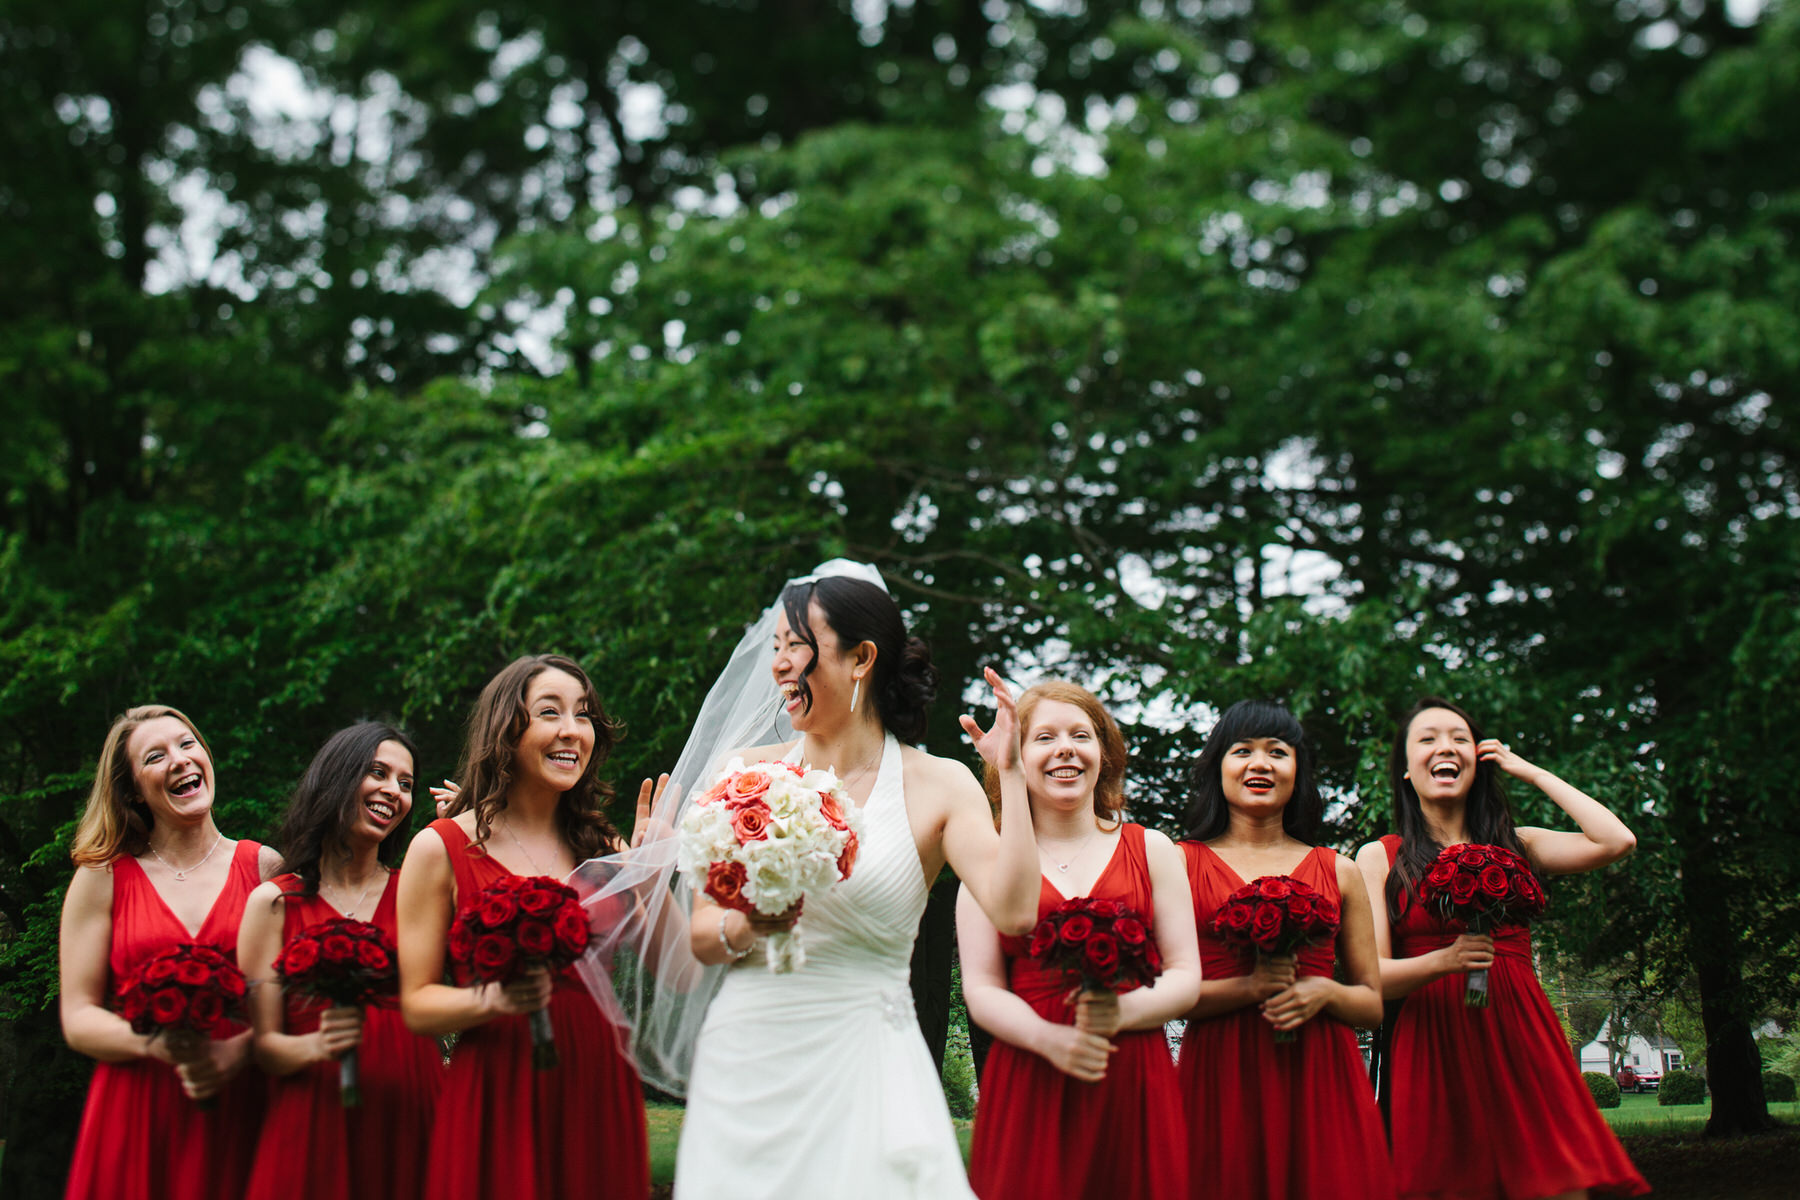 a bride and her bridesmaids laughing together.